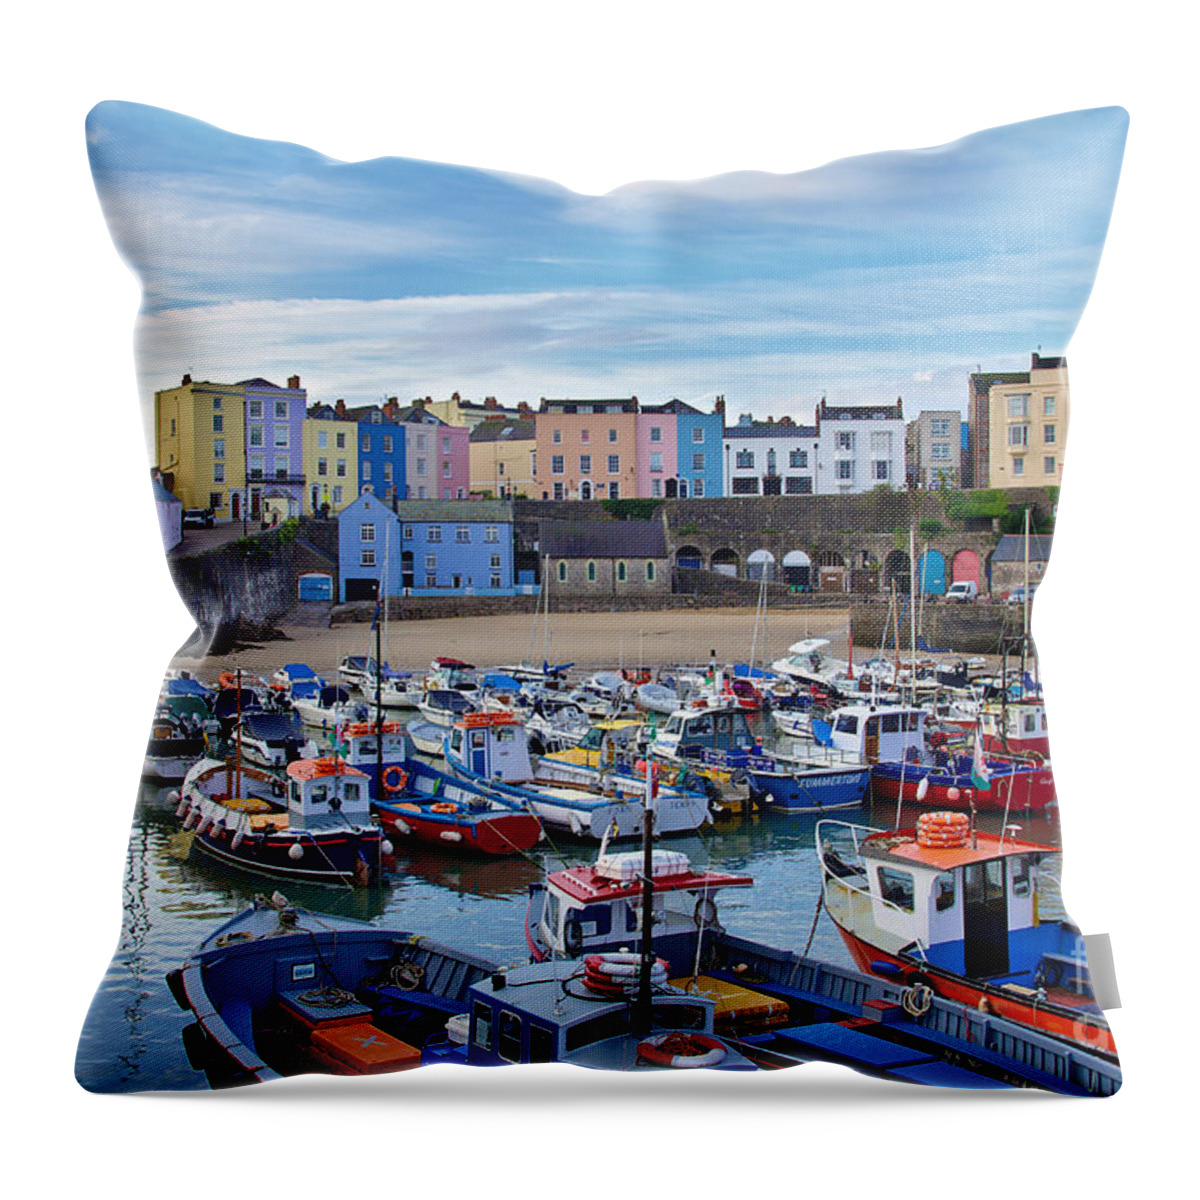 Tenby Throw Pillow featuring the photograph Tenby Harbor Morning Colors by Jeremy Hayden